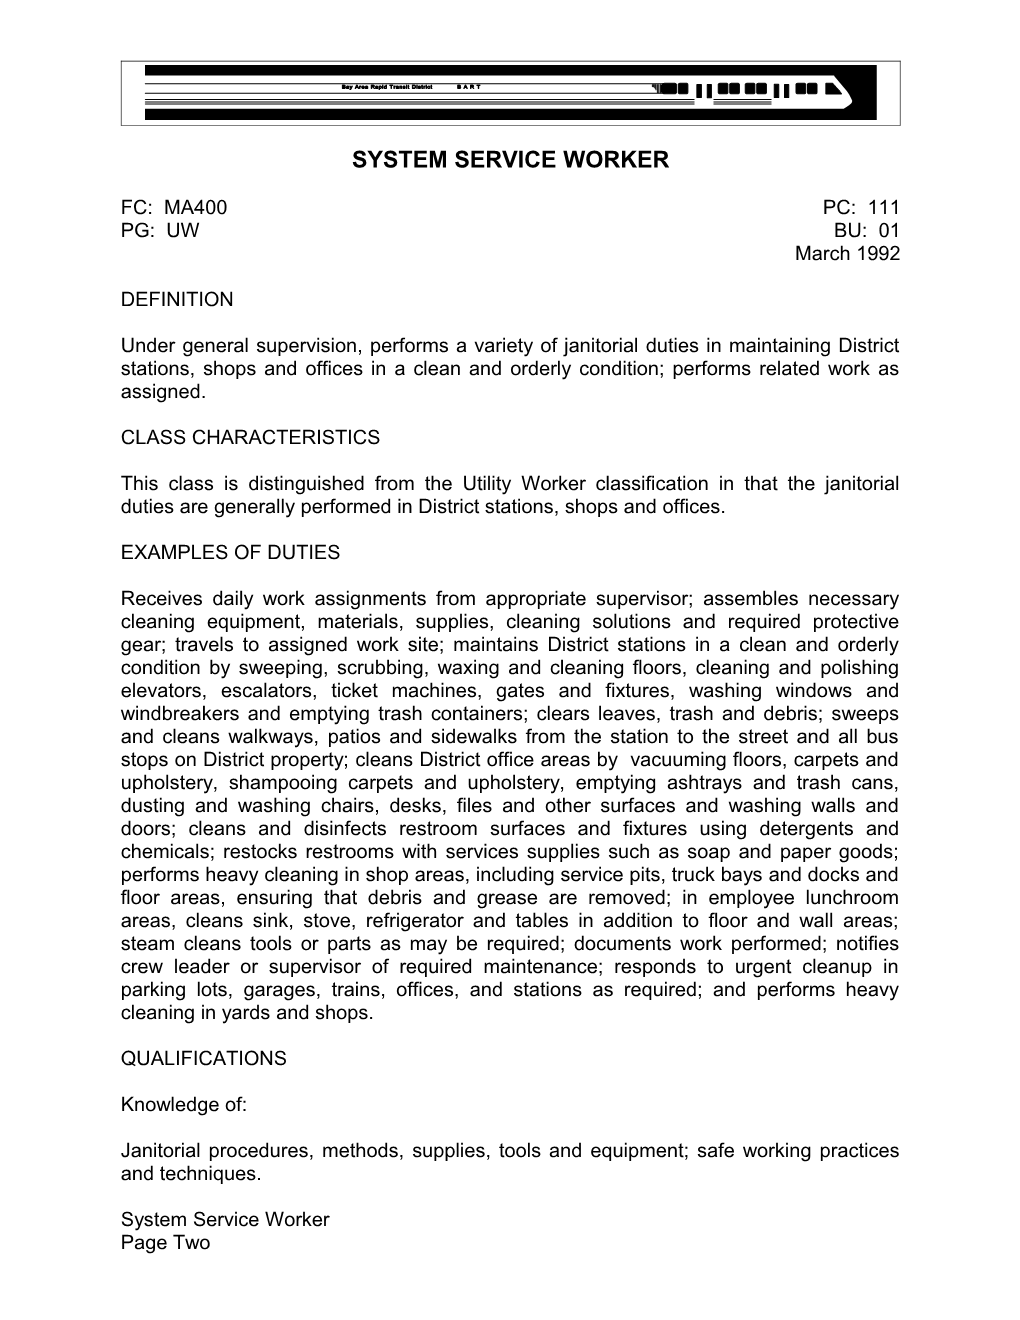 System Service Worker